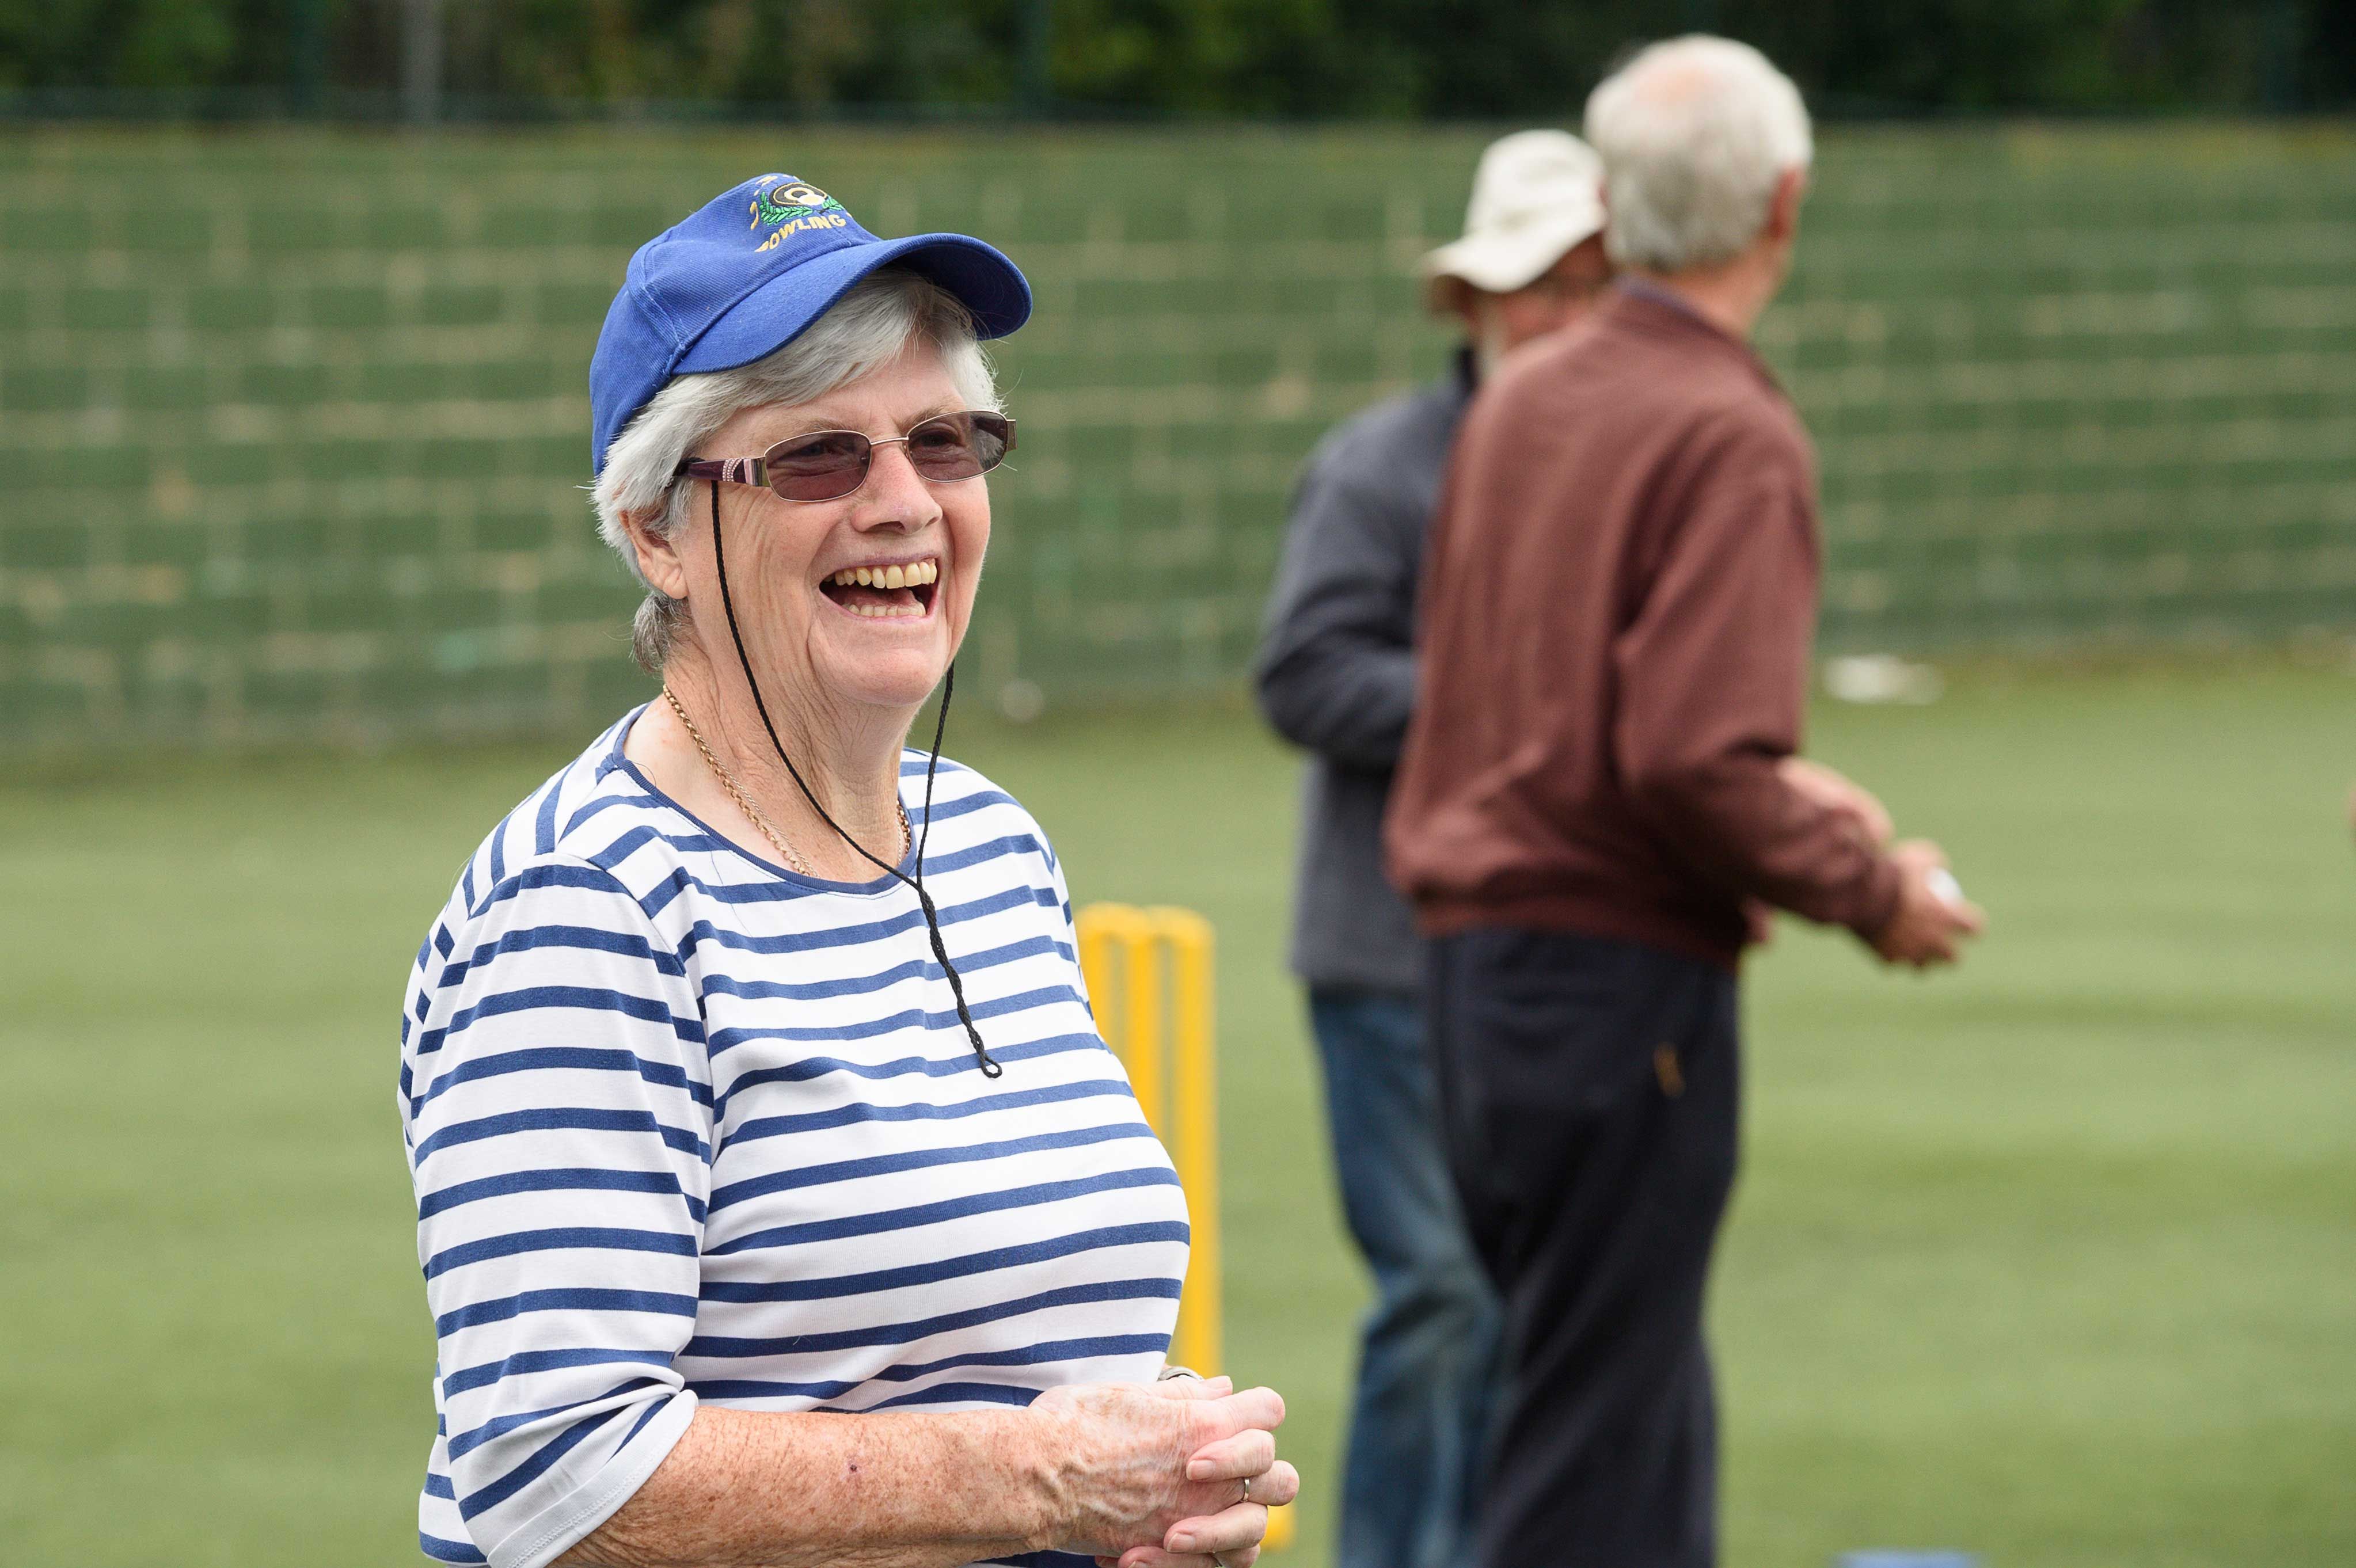 woman smiling to right of camera in front of two adults and a set of cricket stumps